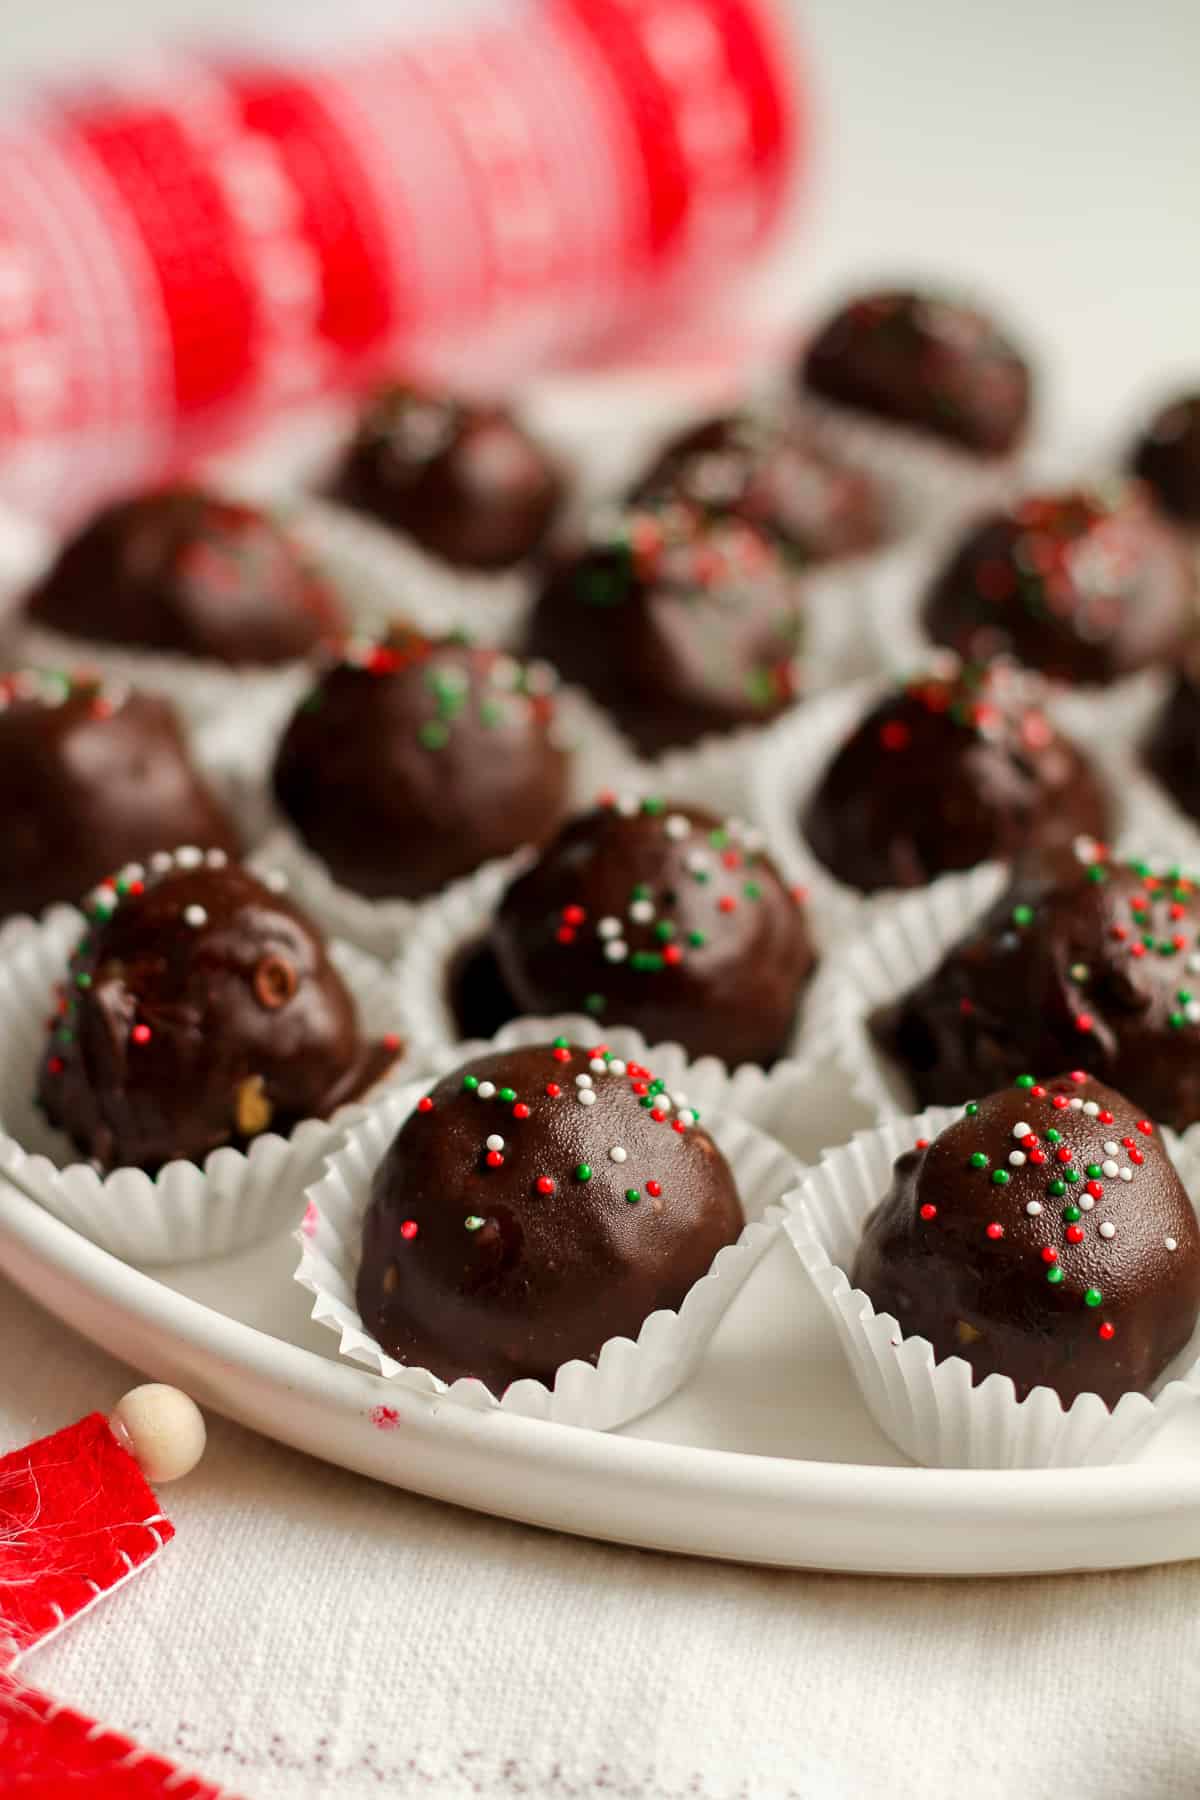 Side shot of the chocolate peanut butter balls.